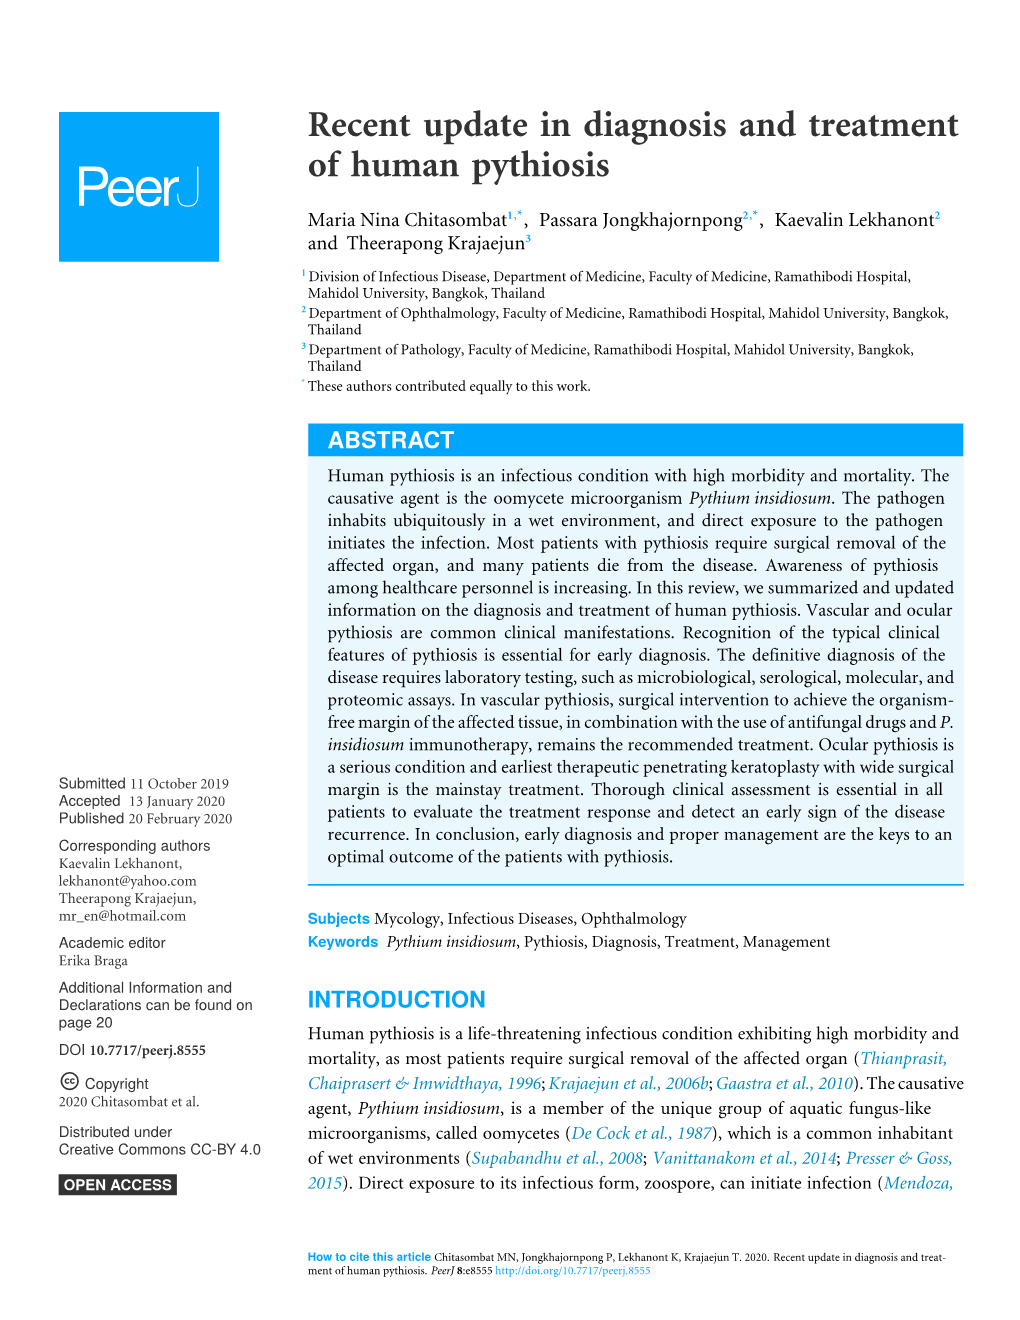 Recent Update in Diagnosis and Treatment of Human Pythiosis